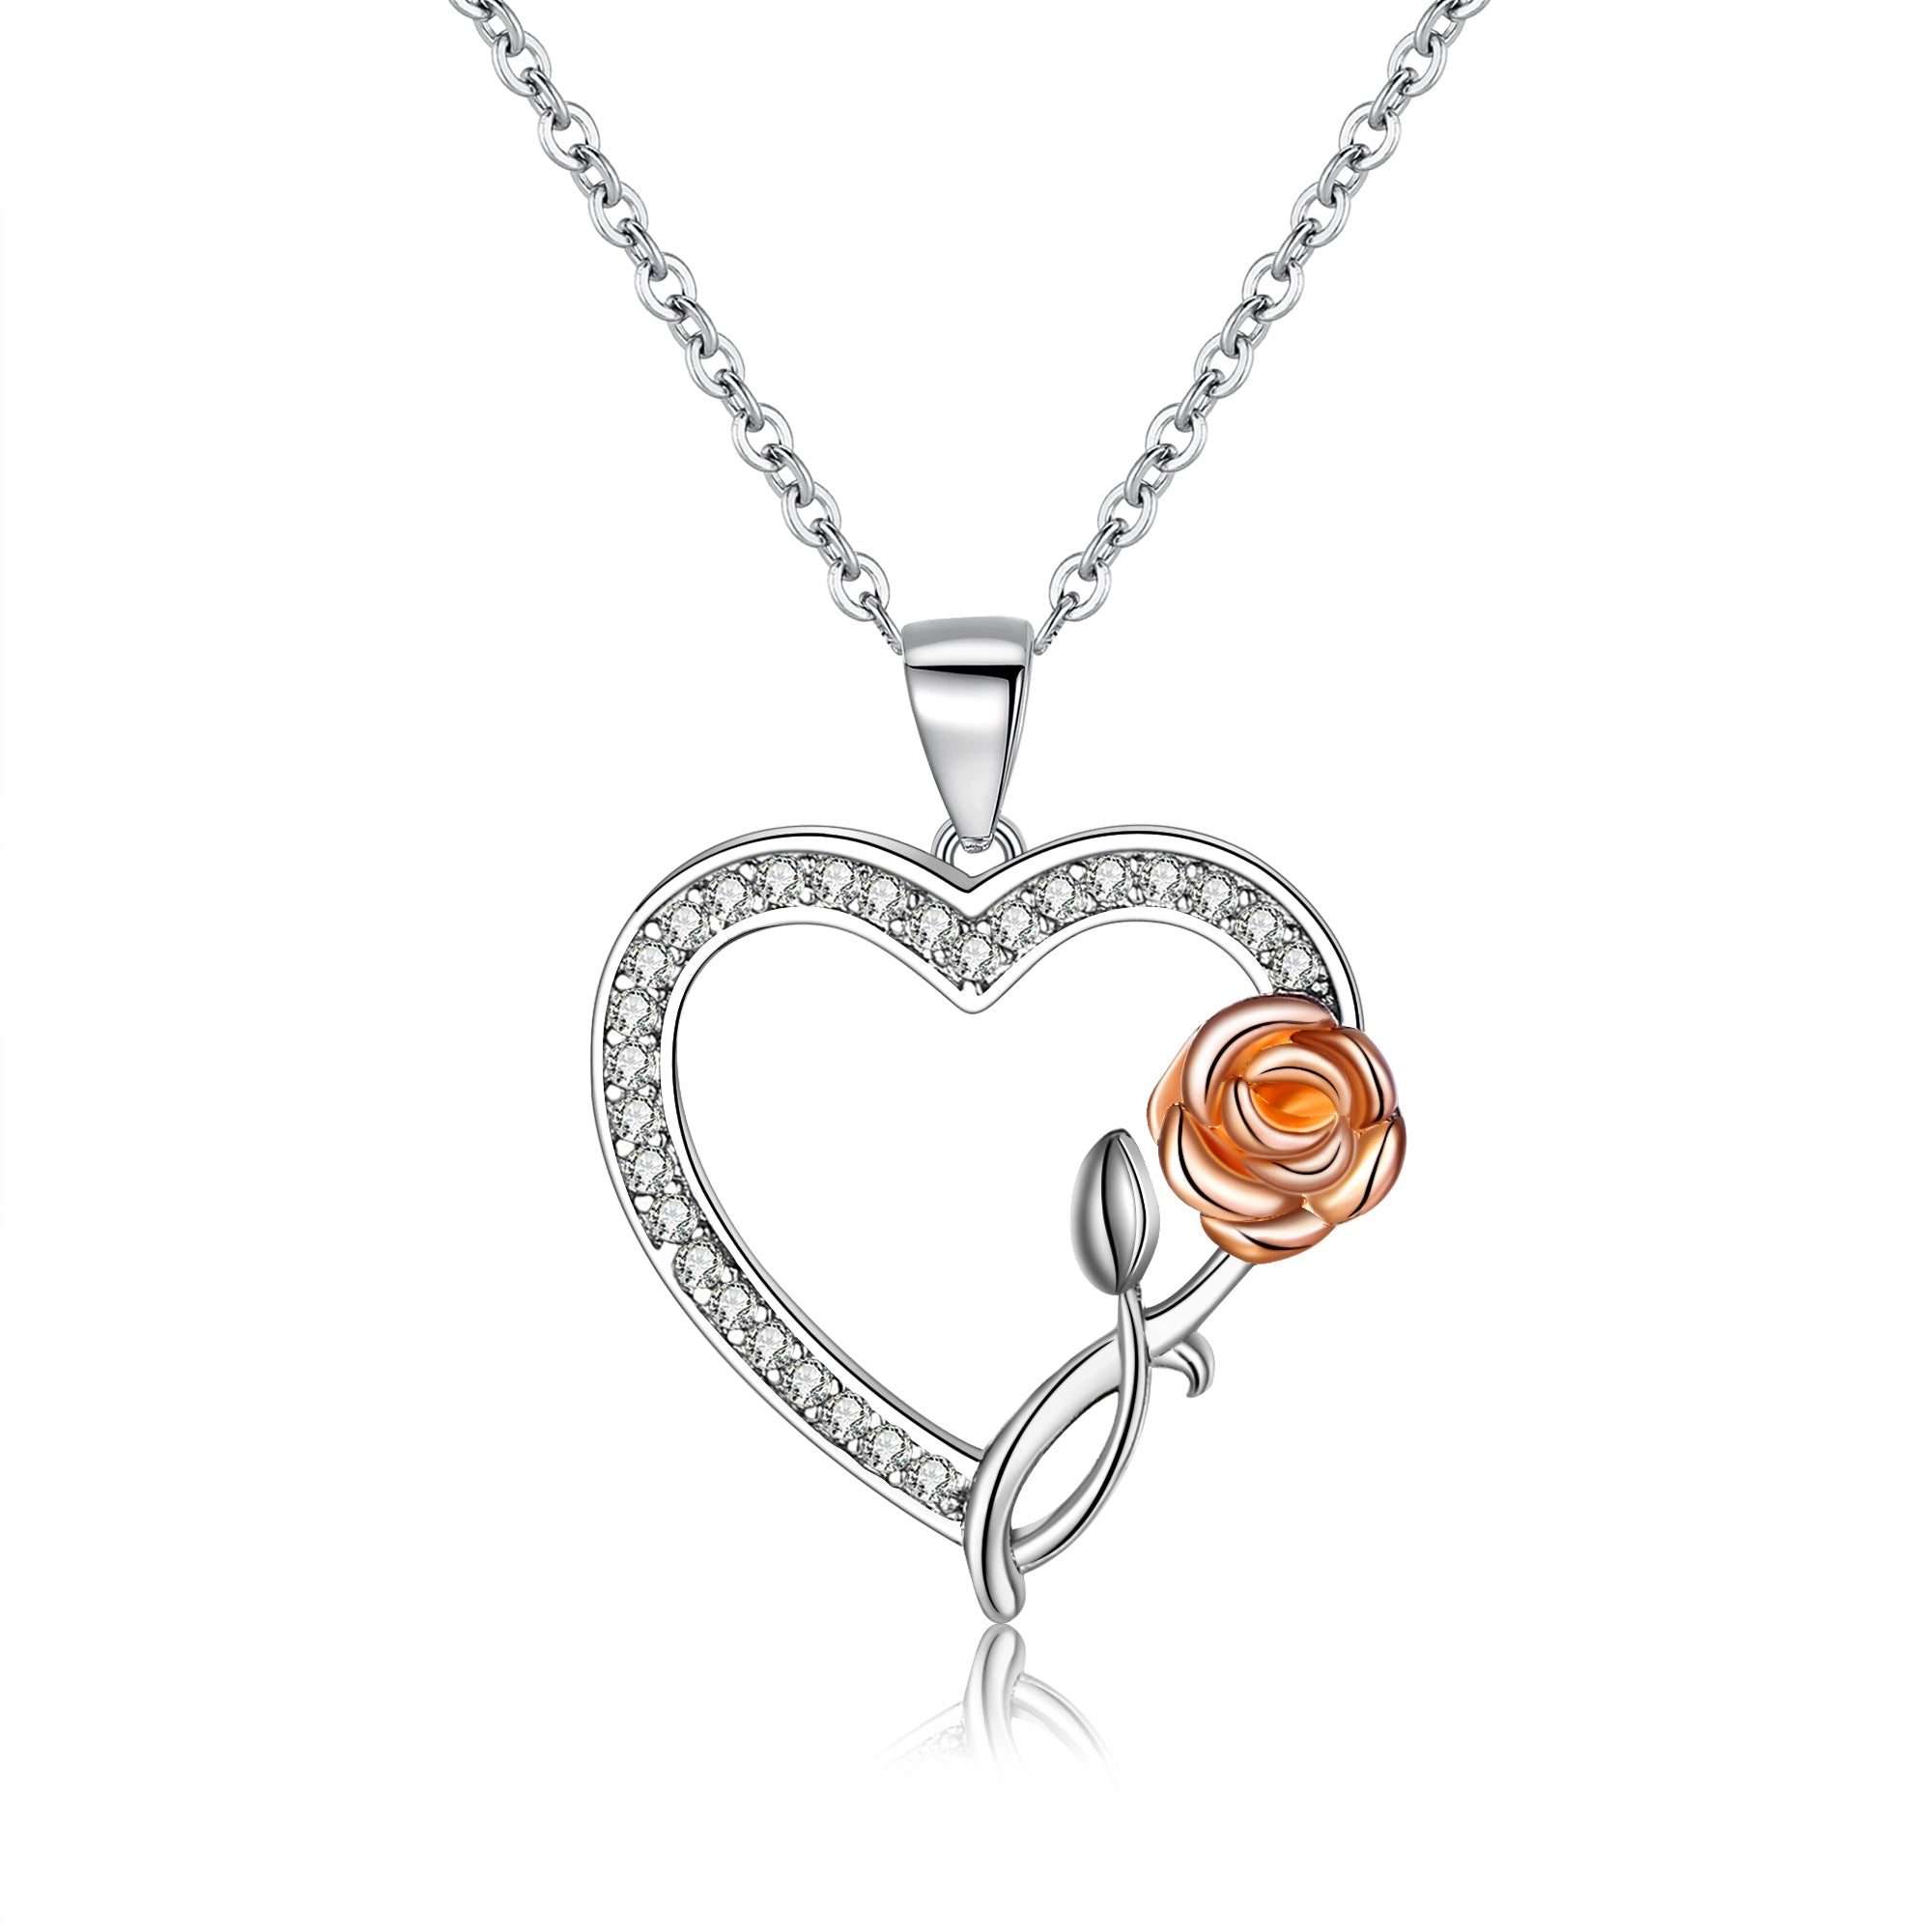 S925 Sterling Silver Rose Flower Pendant Necklace, Silver Rose Necklac